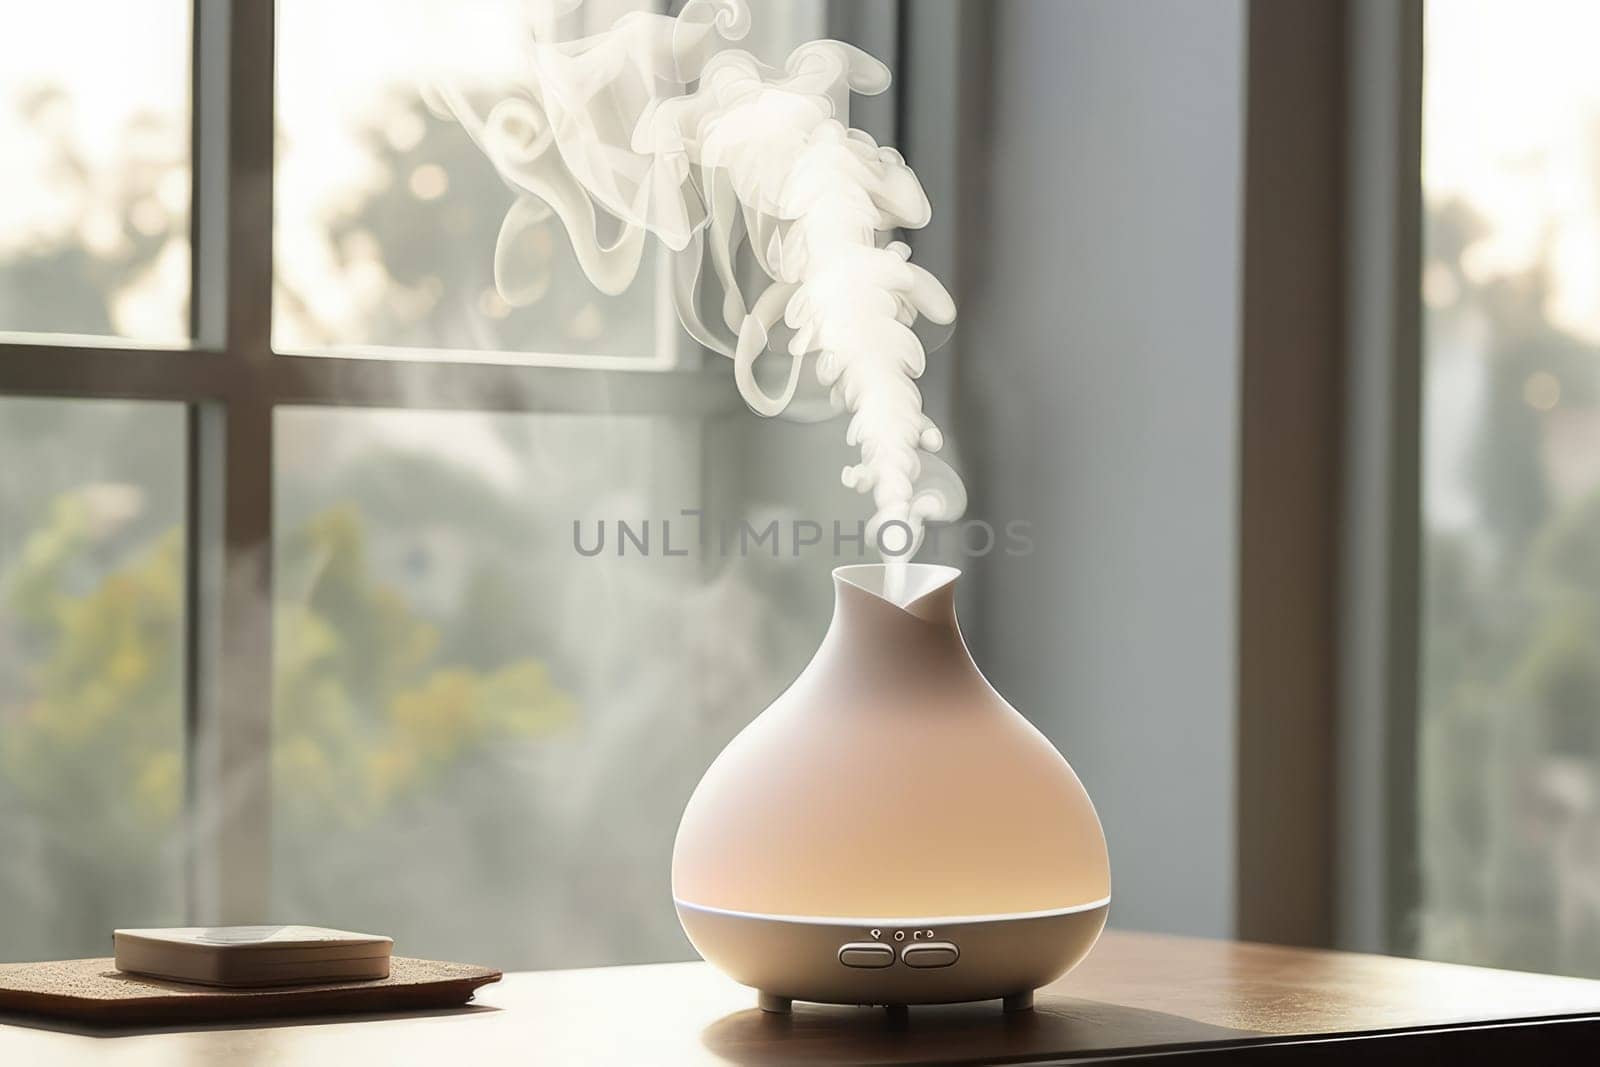 Aroma oil white glass diffuser with rising steam flow on table by window